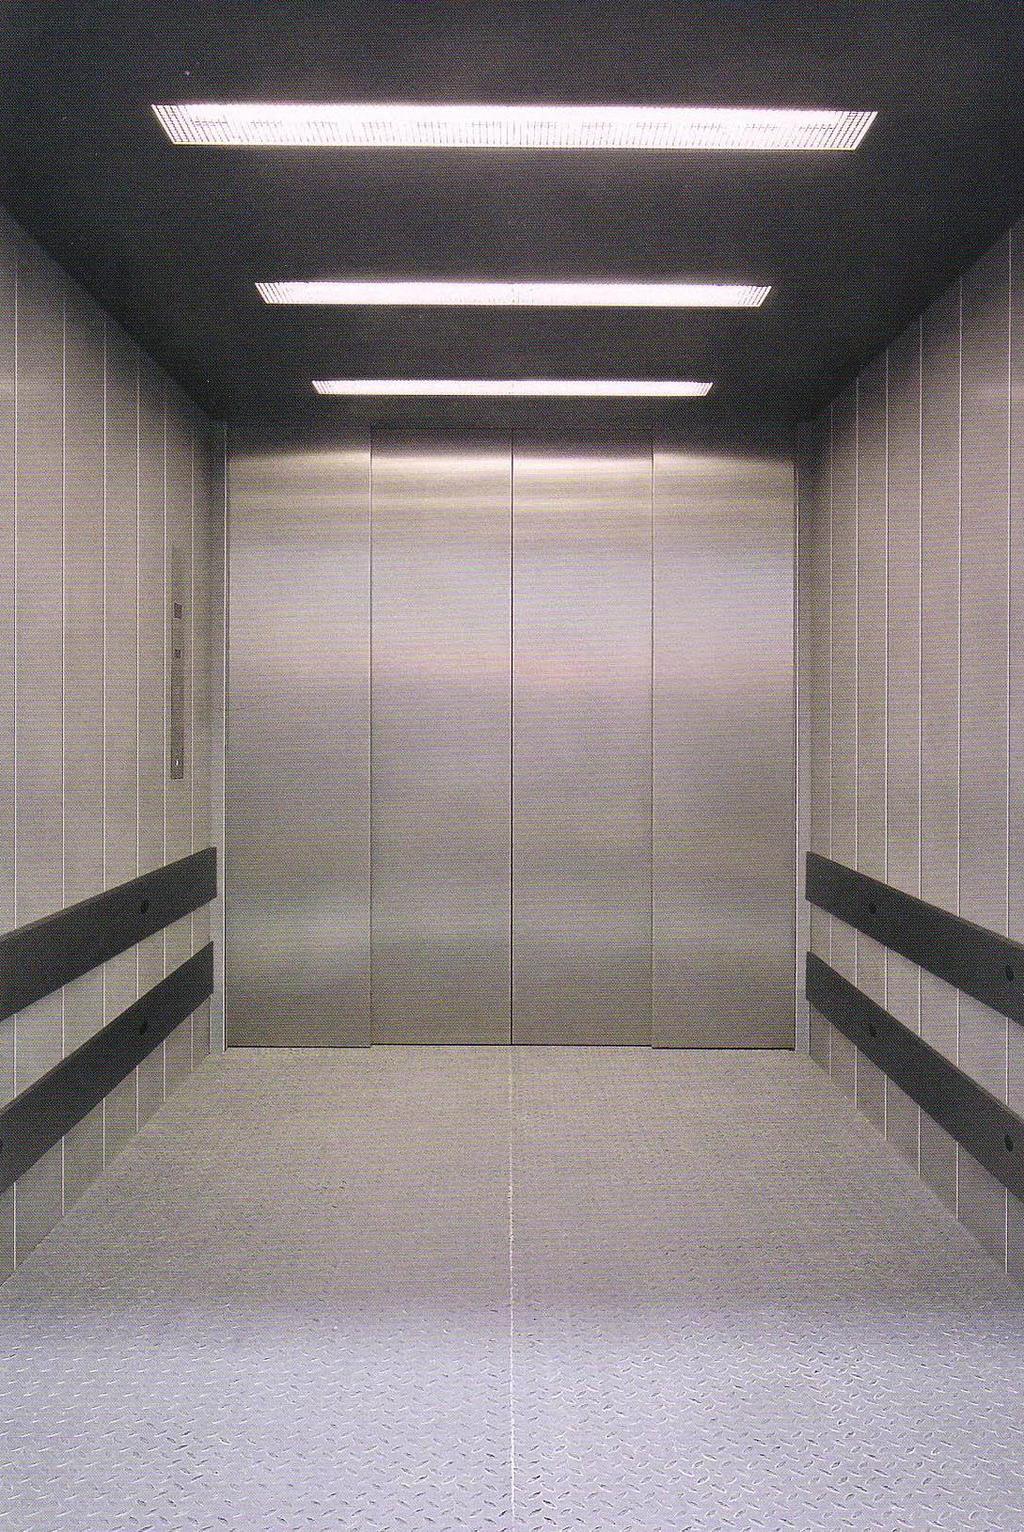 use of goods lifts a 3000kg goods lift handles sheet materials partitioning systems furniture in safe lift mode